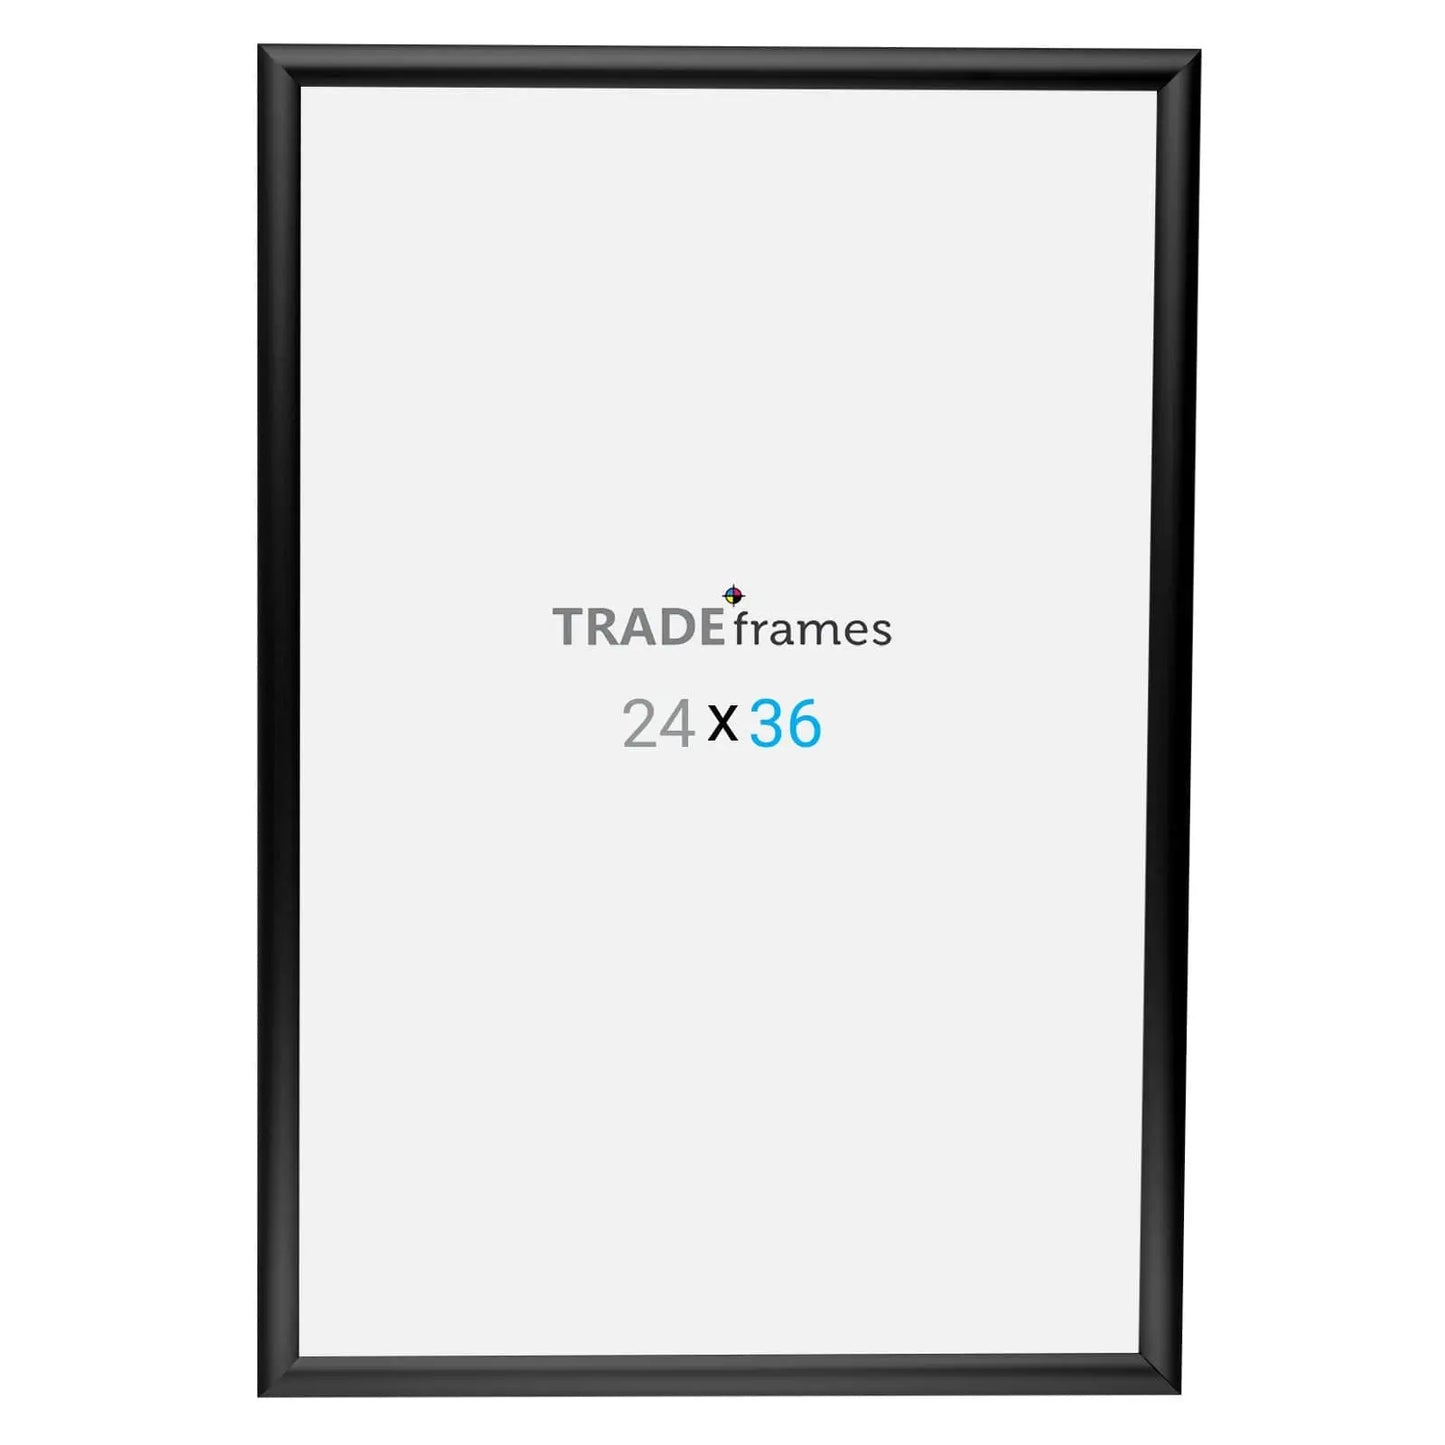 24 x 36 Posters 